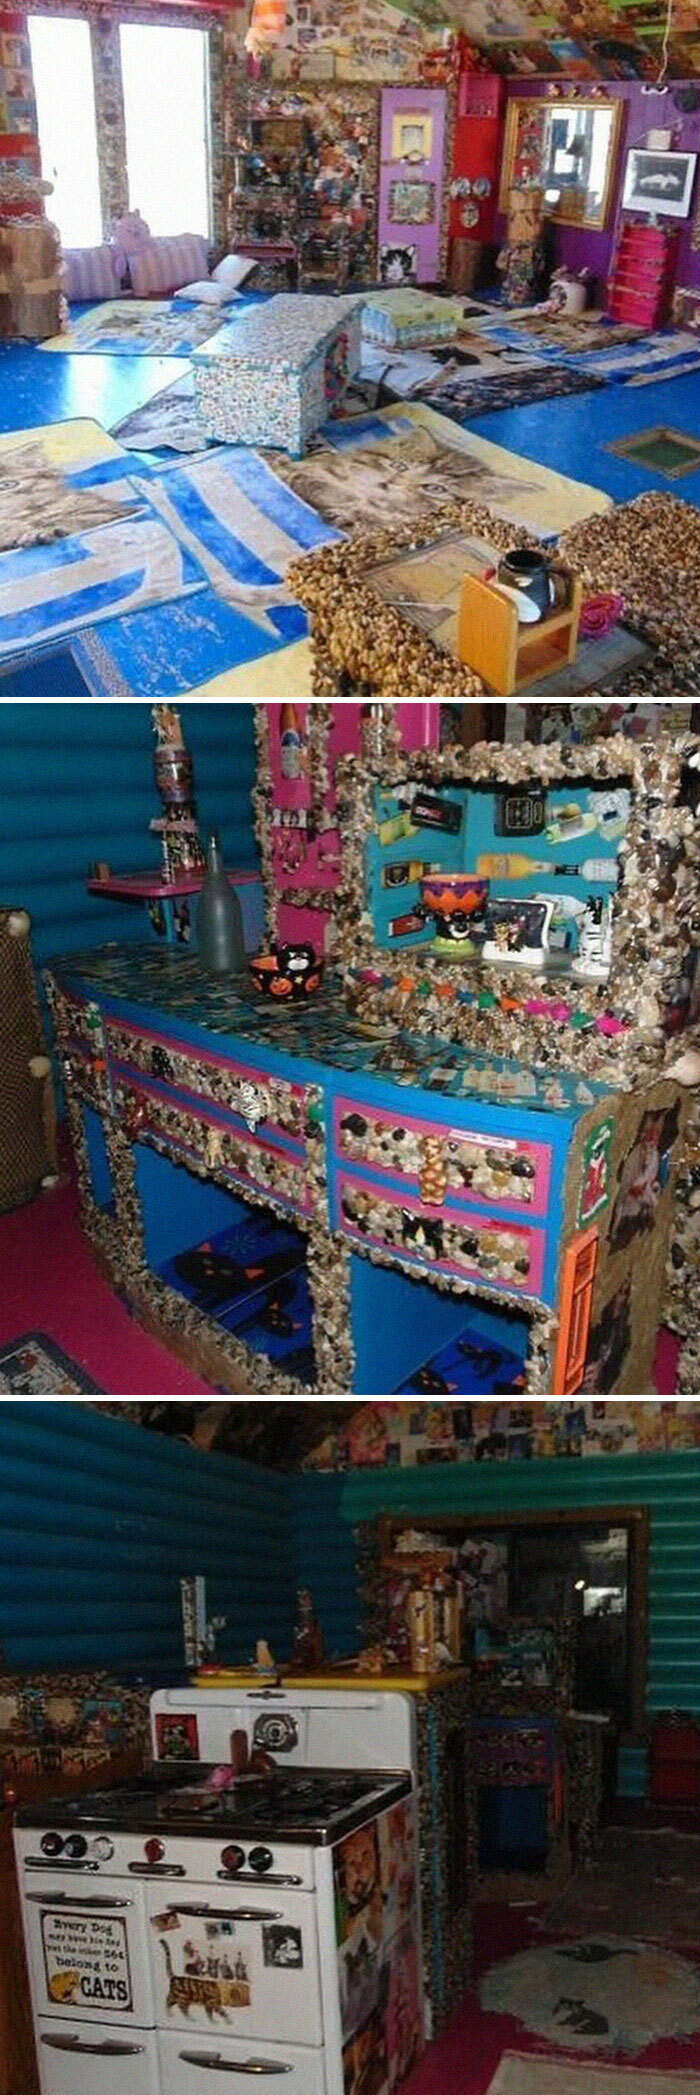 This Cat Lover’s Room, I Found On Pinterest